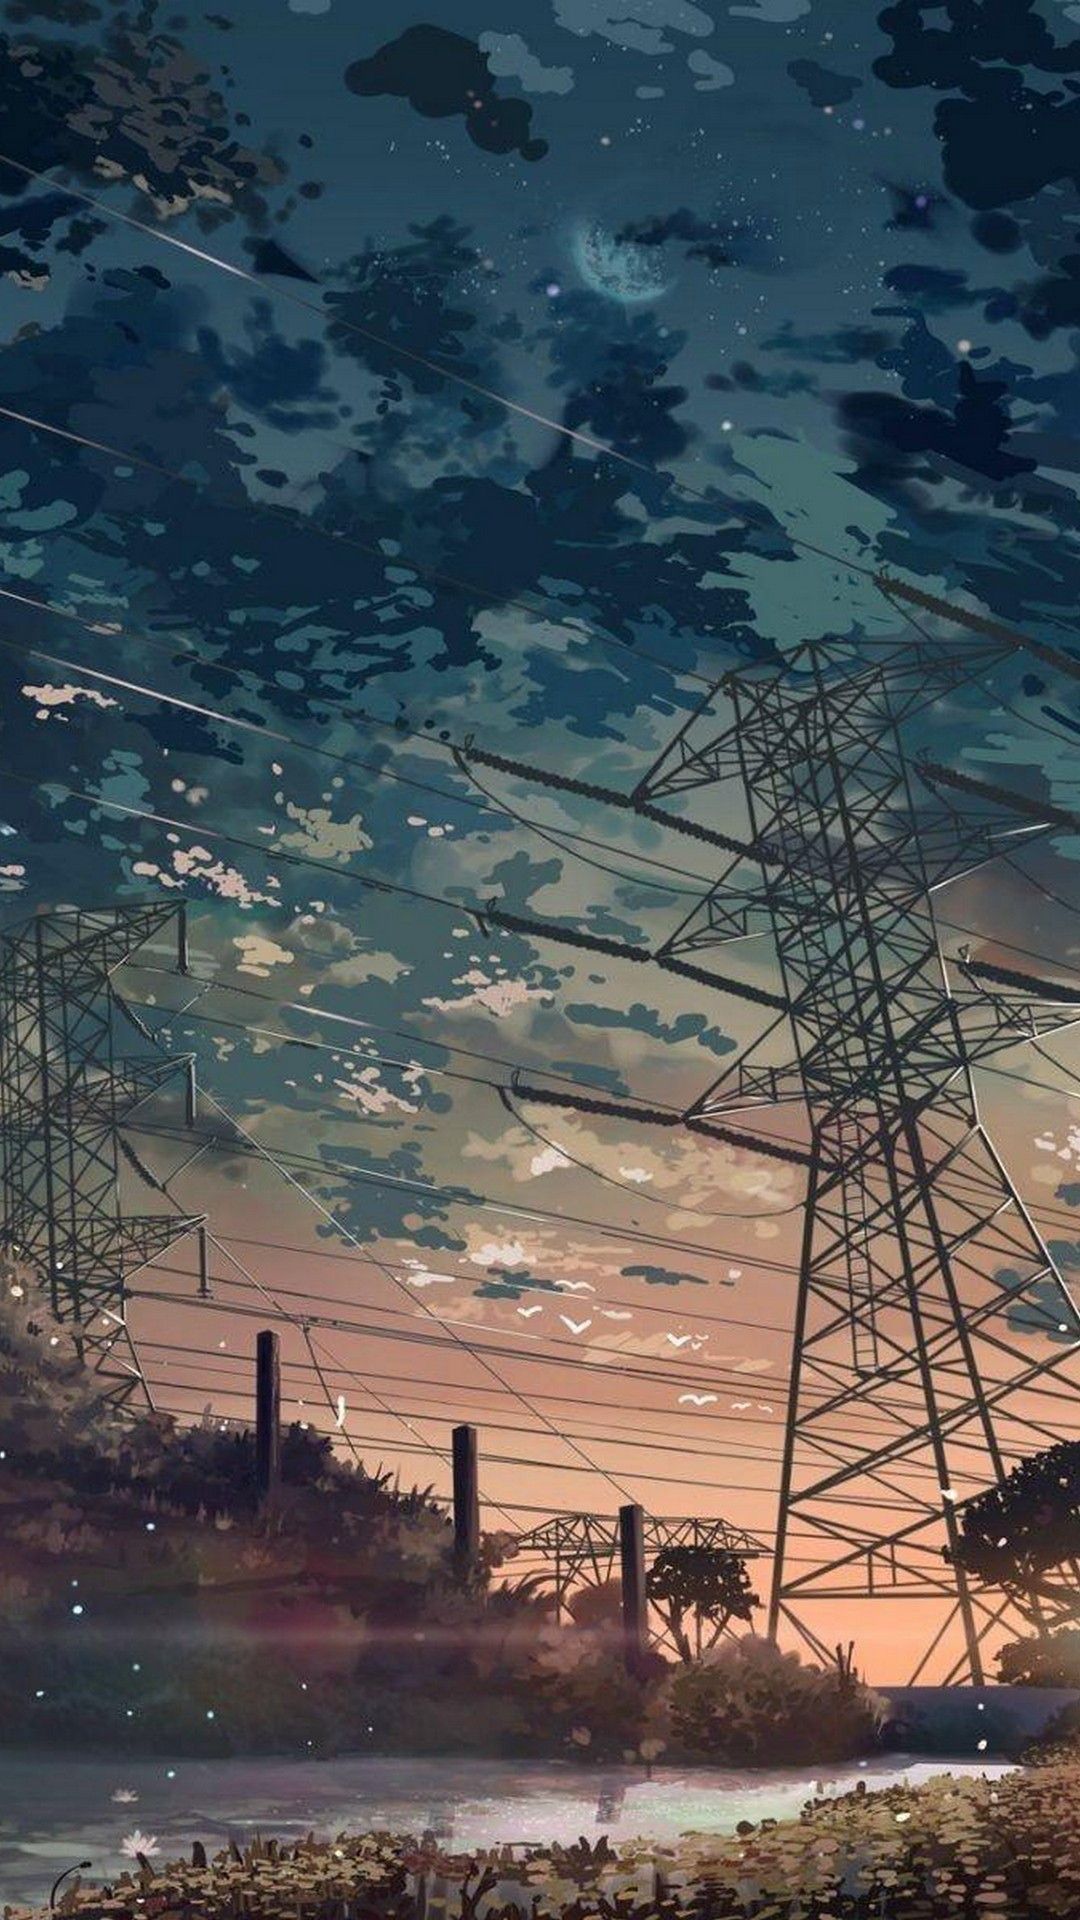 IPhone wallpaper of power lines in the sunset - IPhone, anime city